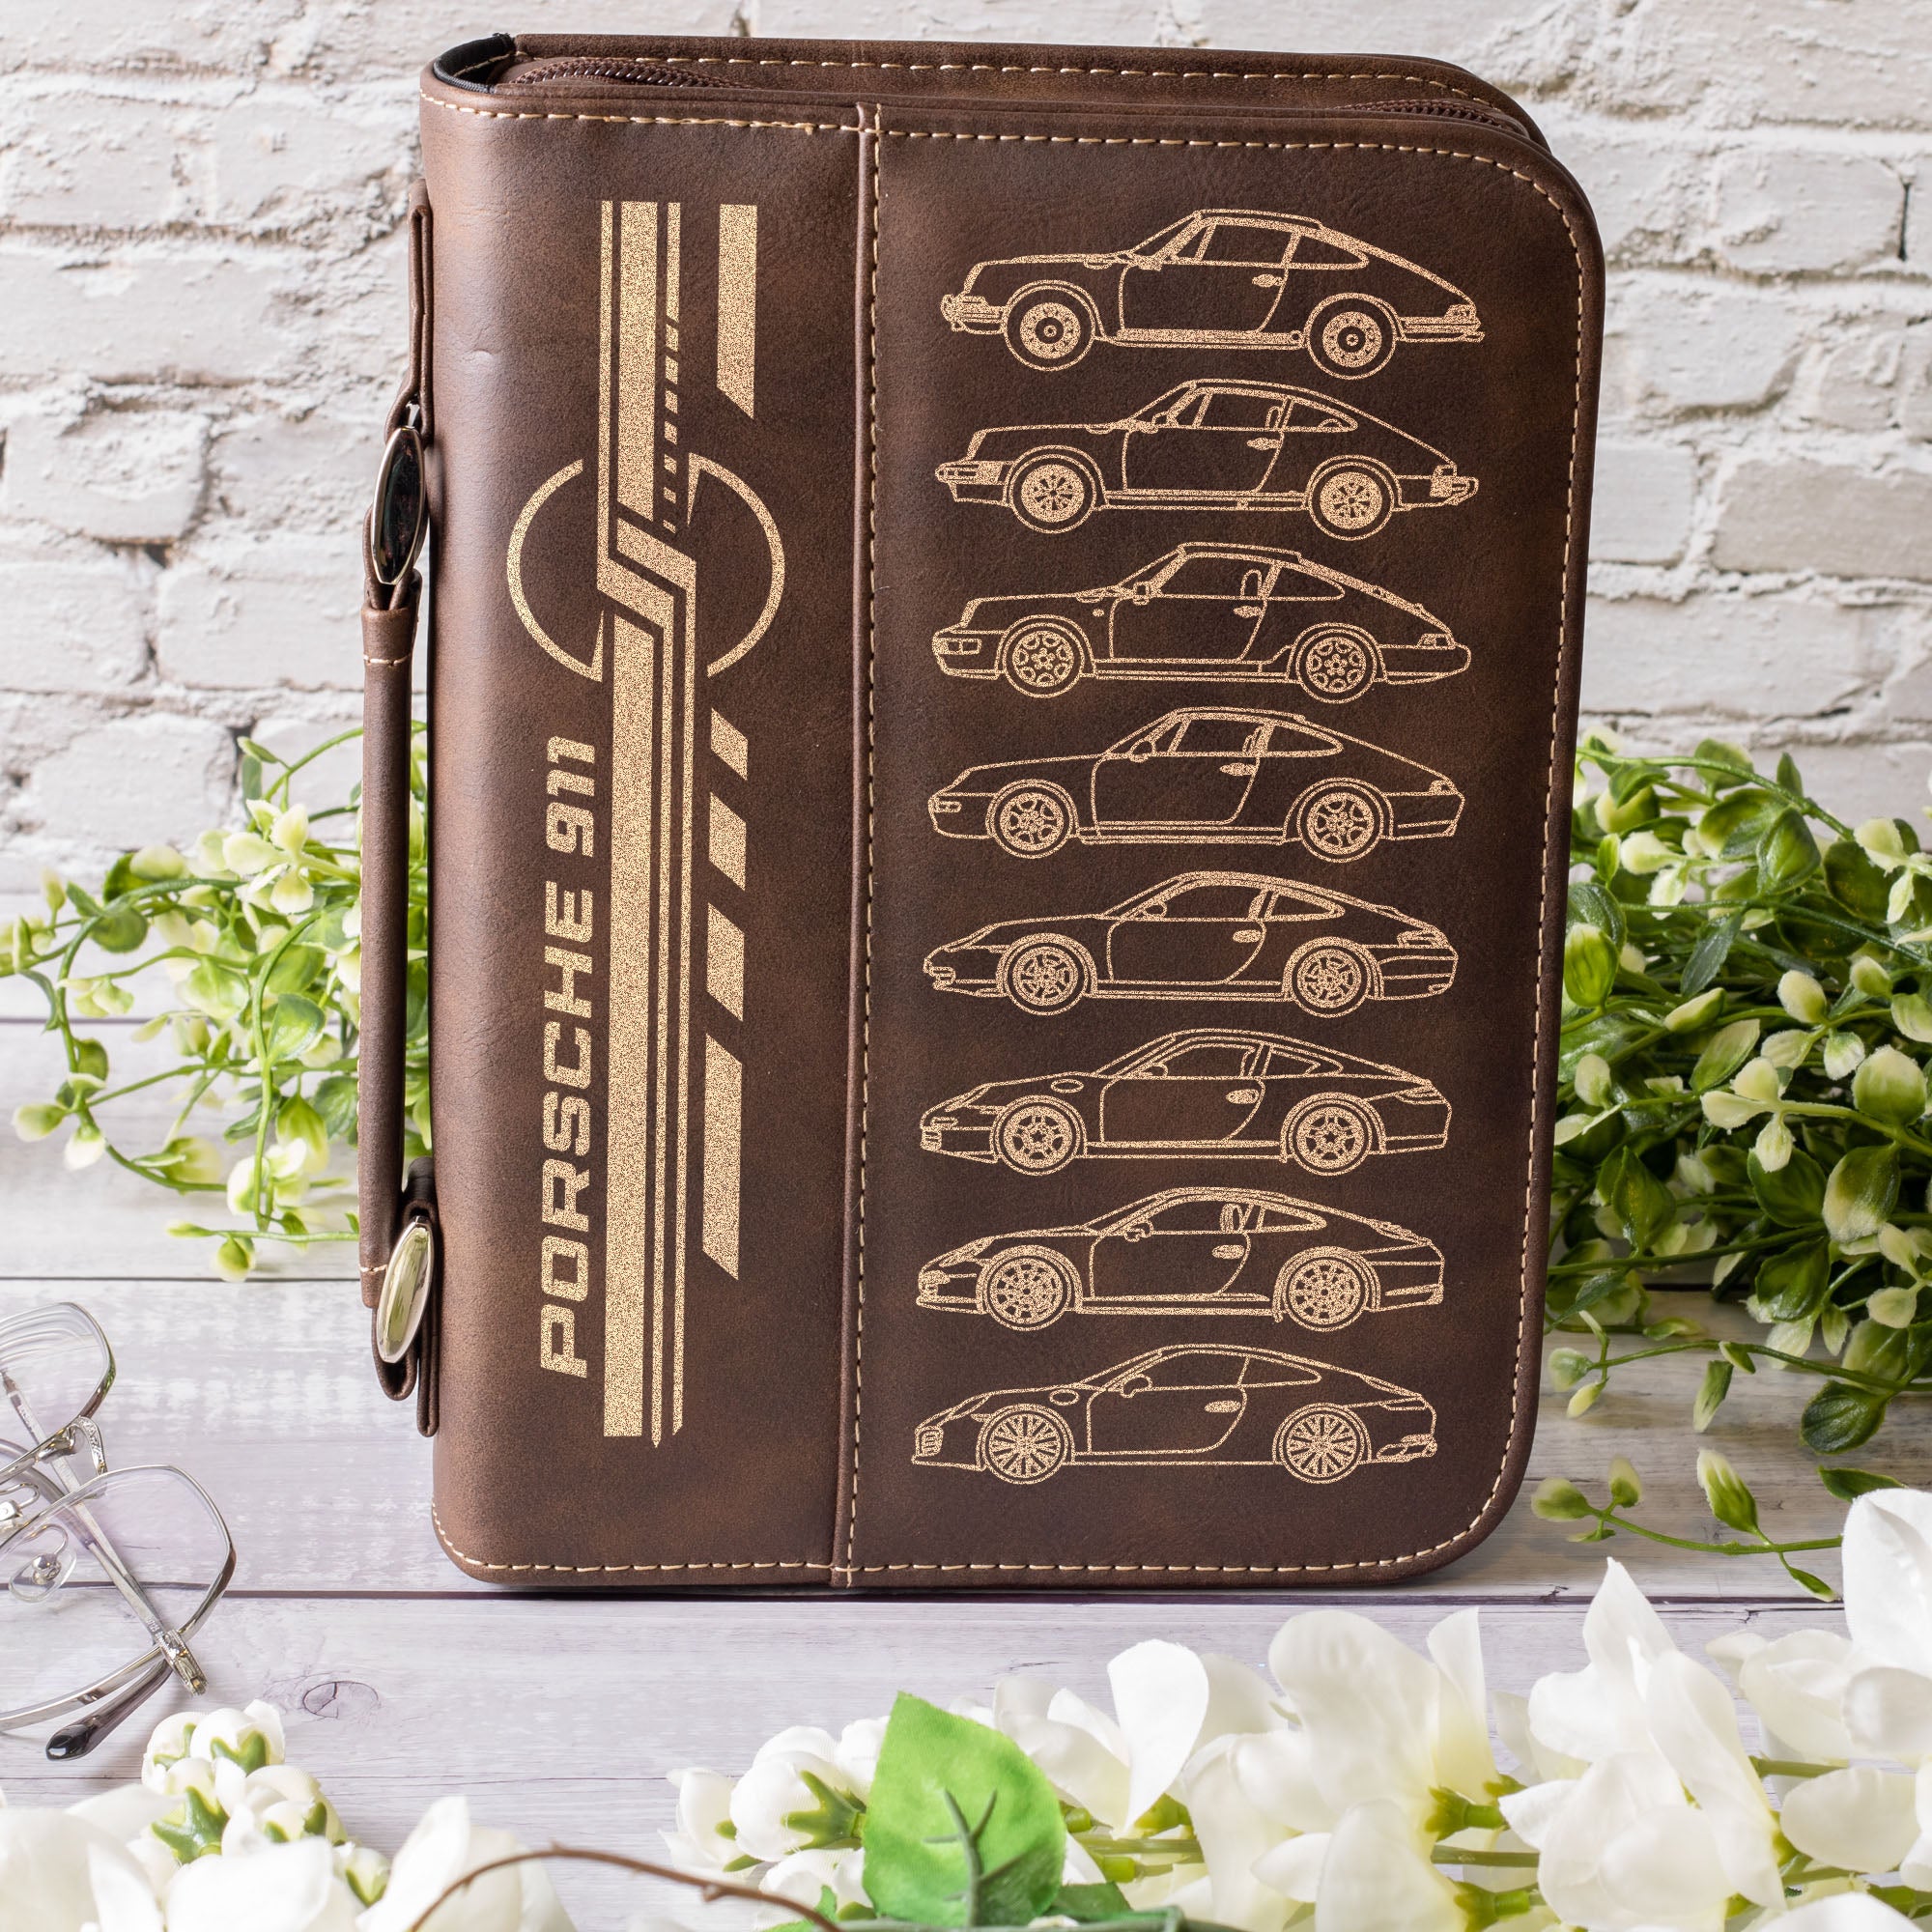 911 Silhouette Collection Leather Book Cover